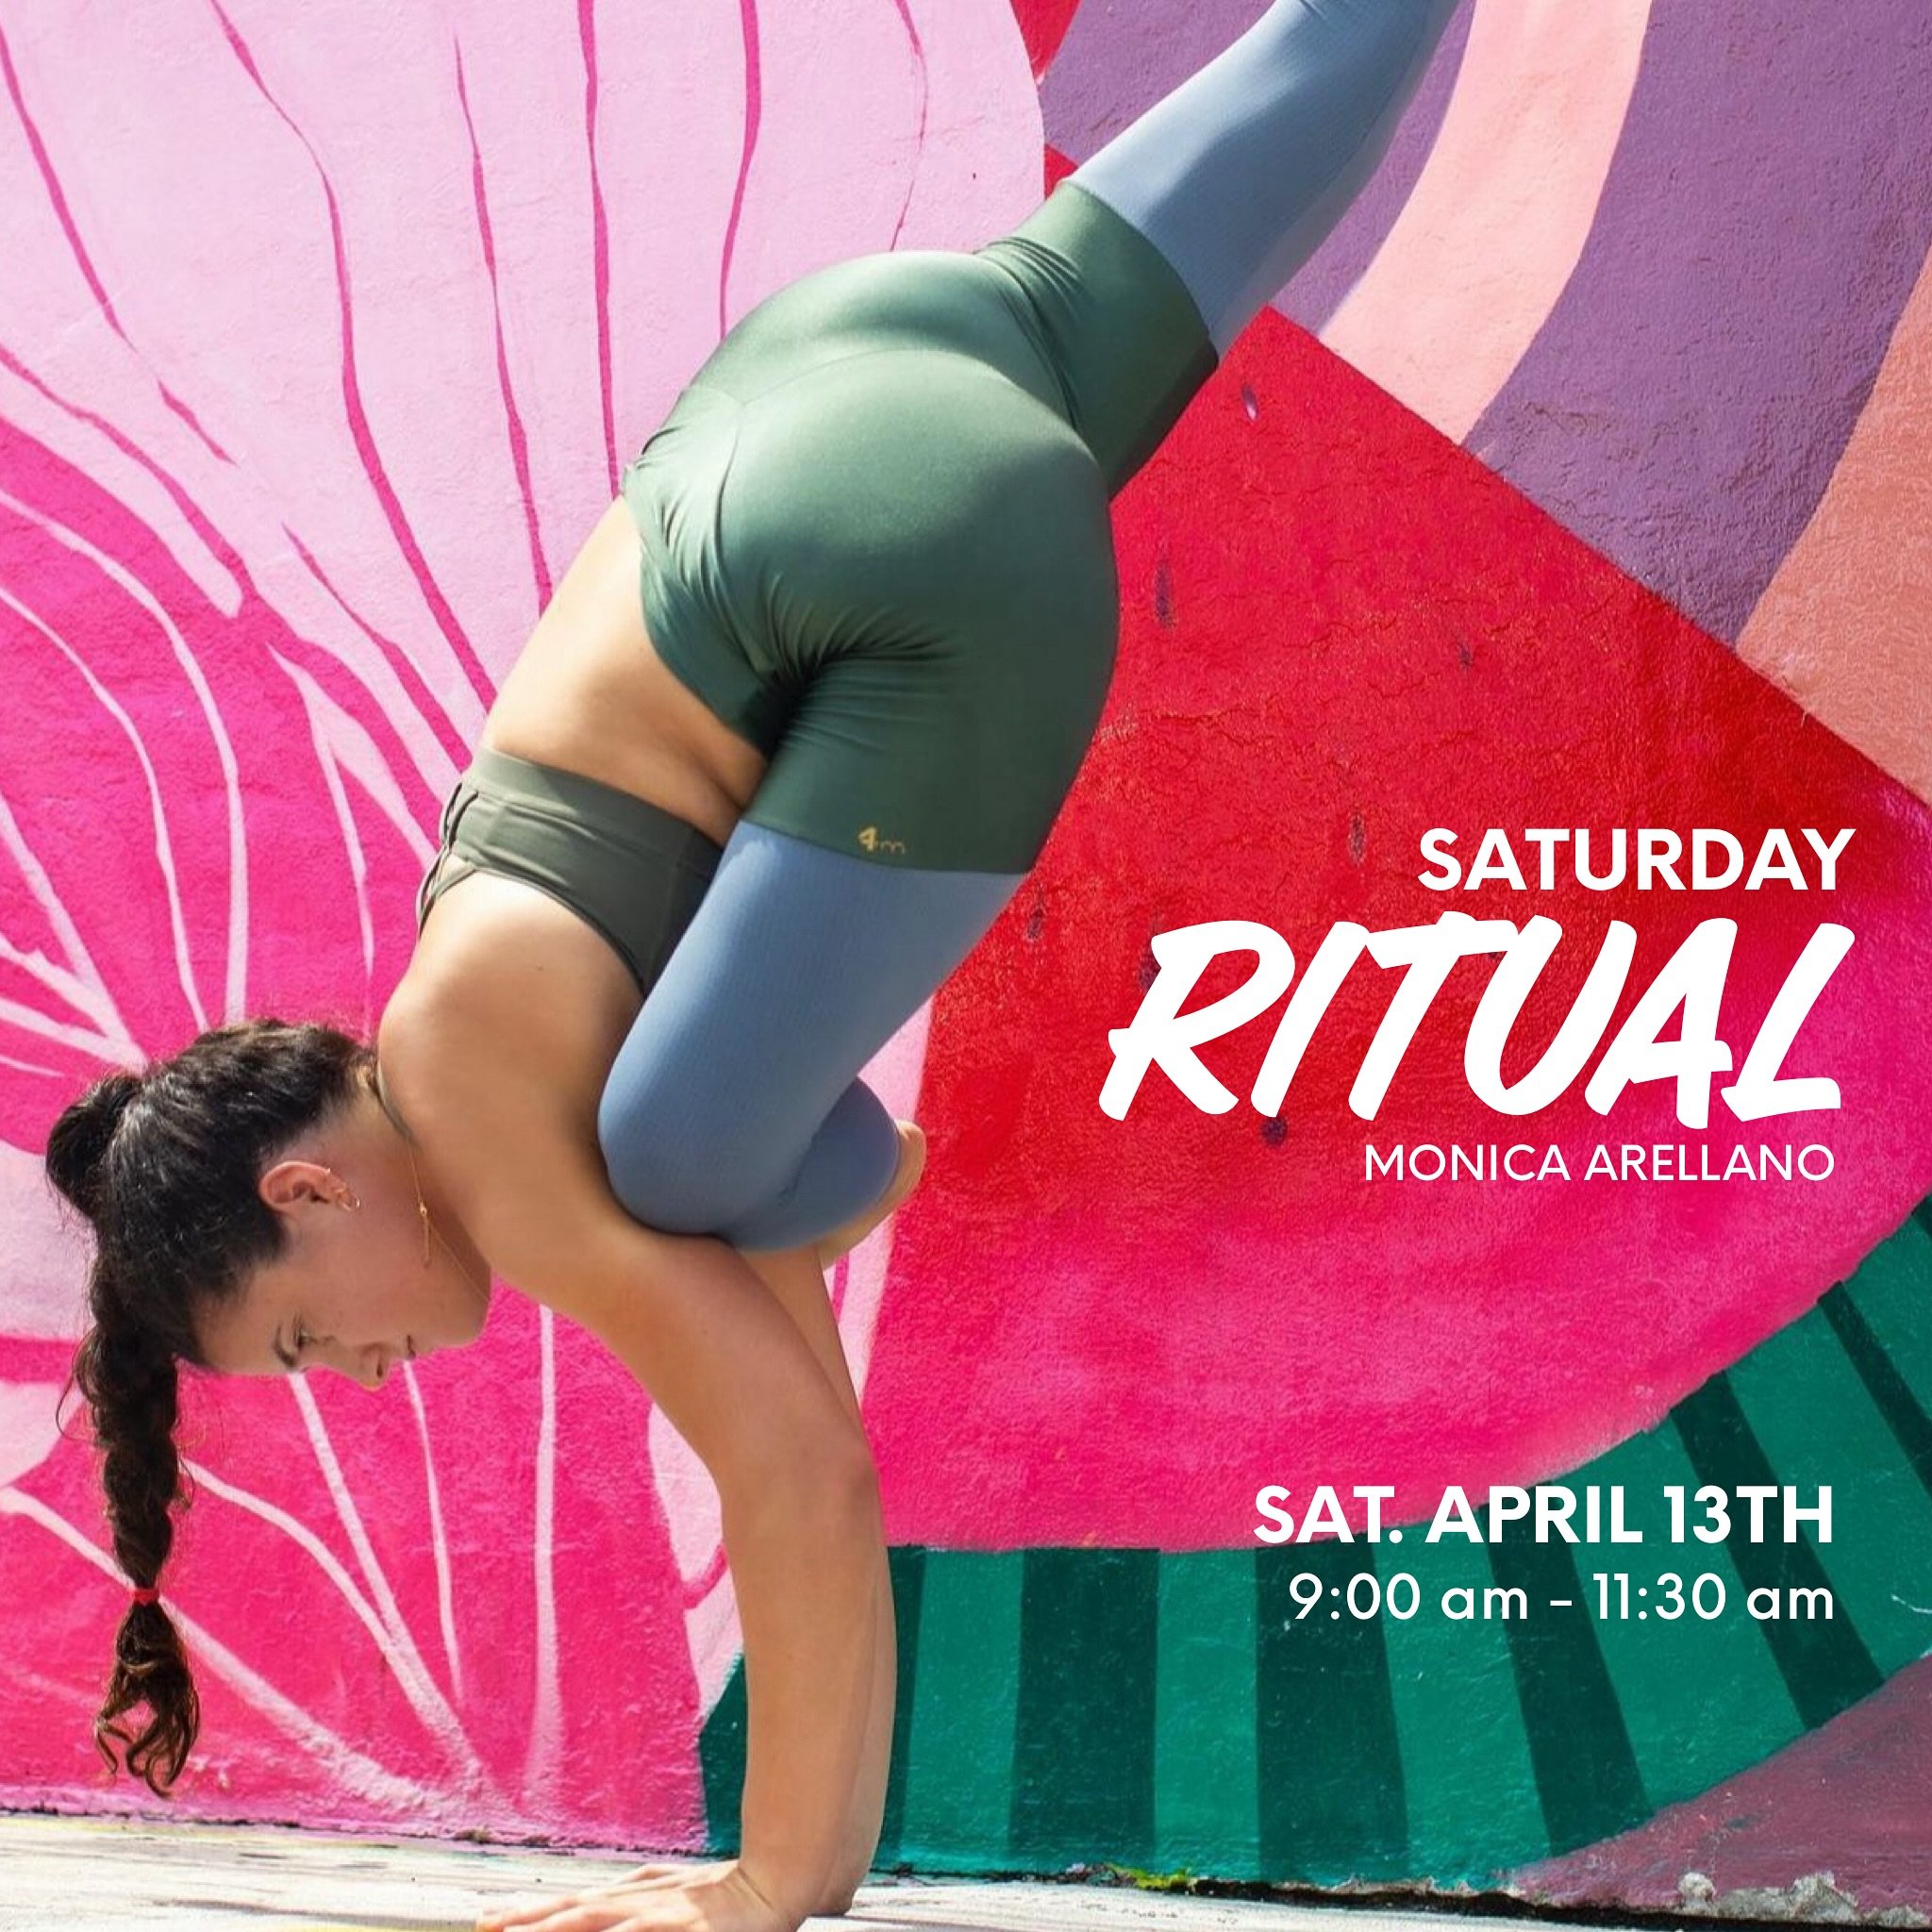 @monicarellano will be leading our Saturday Ritual today! Come join us from 9 am - 12 pm - Guided Full Primary &amp; Conference! Come join him!. 

Join us in person at @miamilifecenter or online via @omstarsofficial 

Register in our website and save